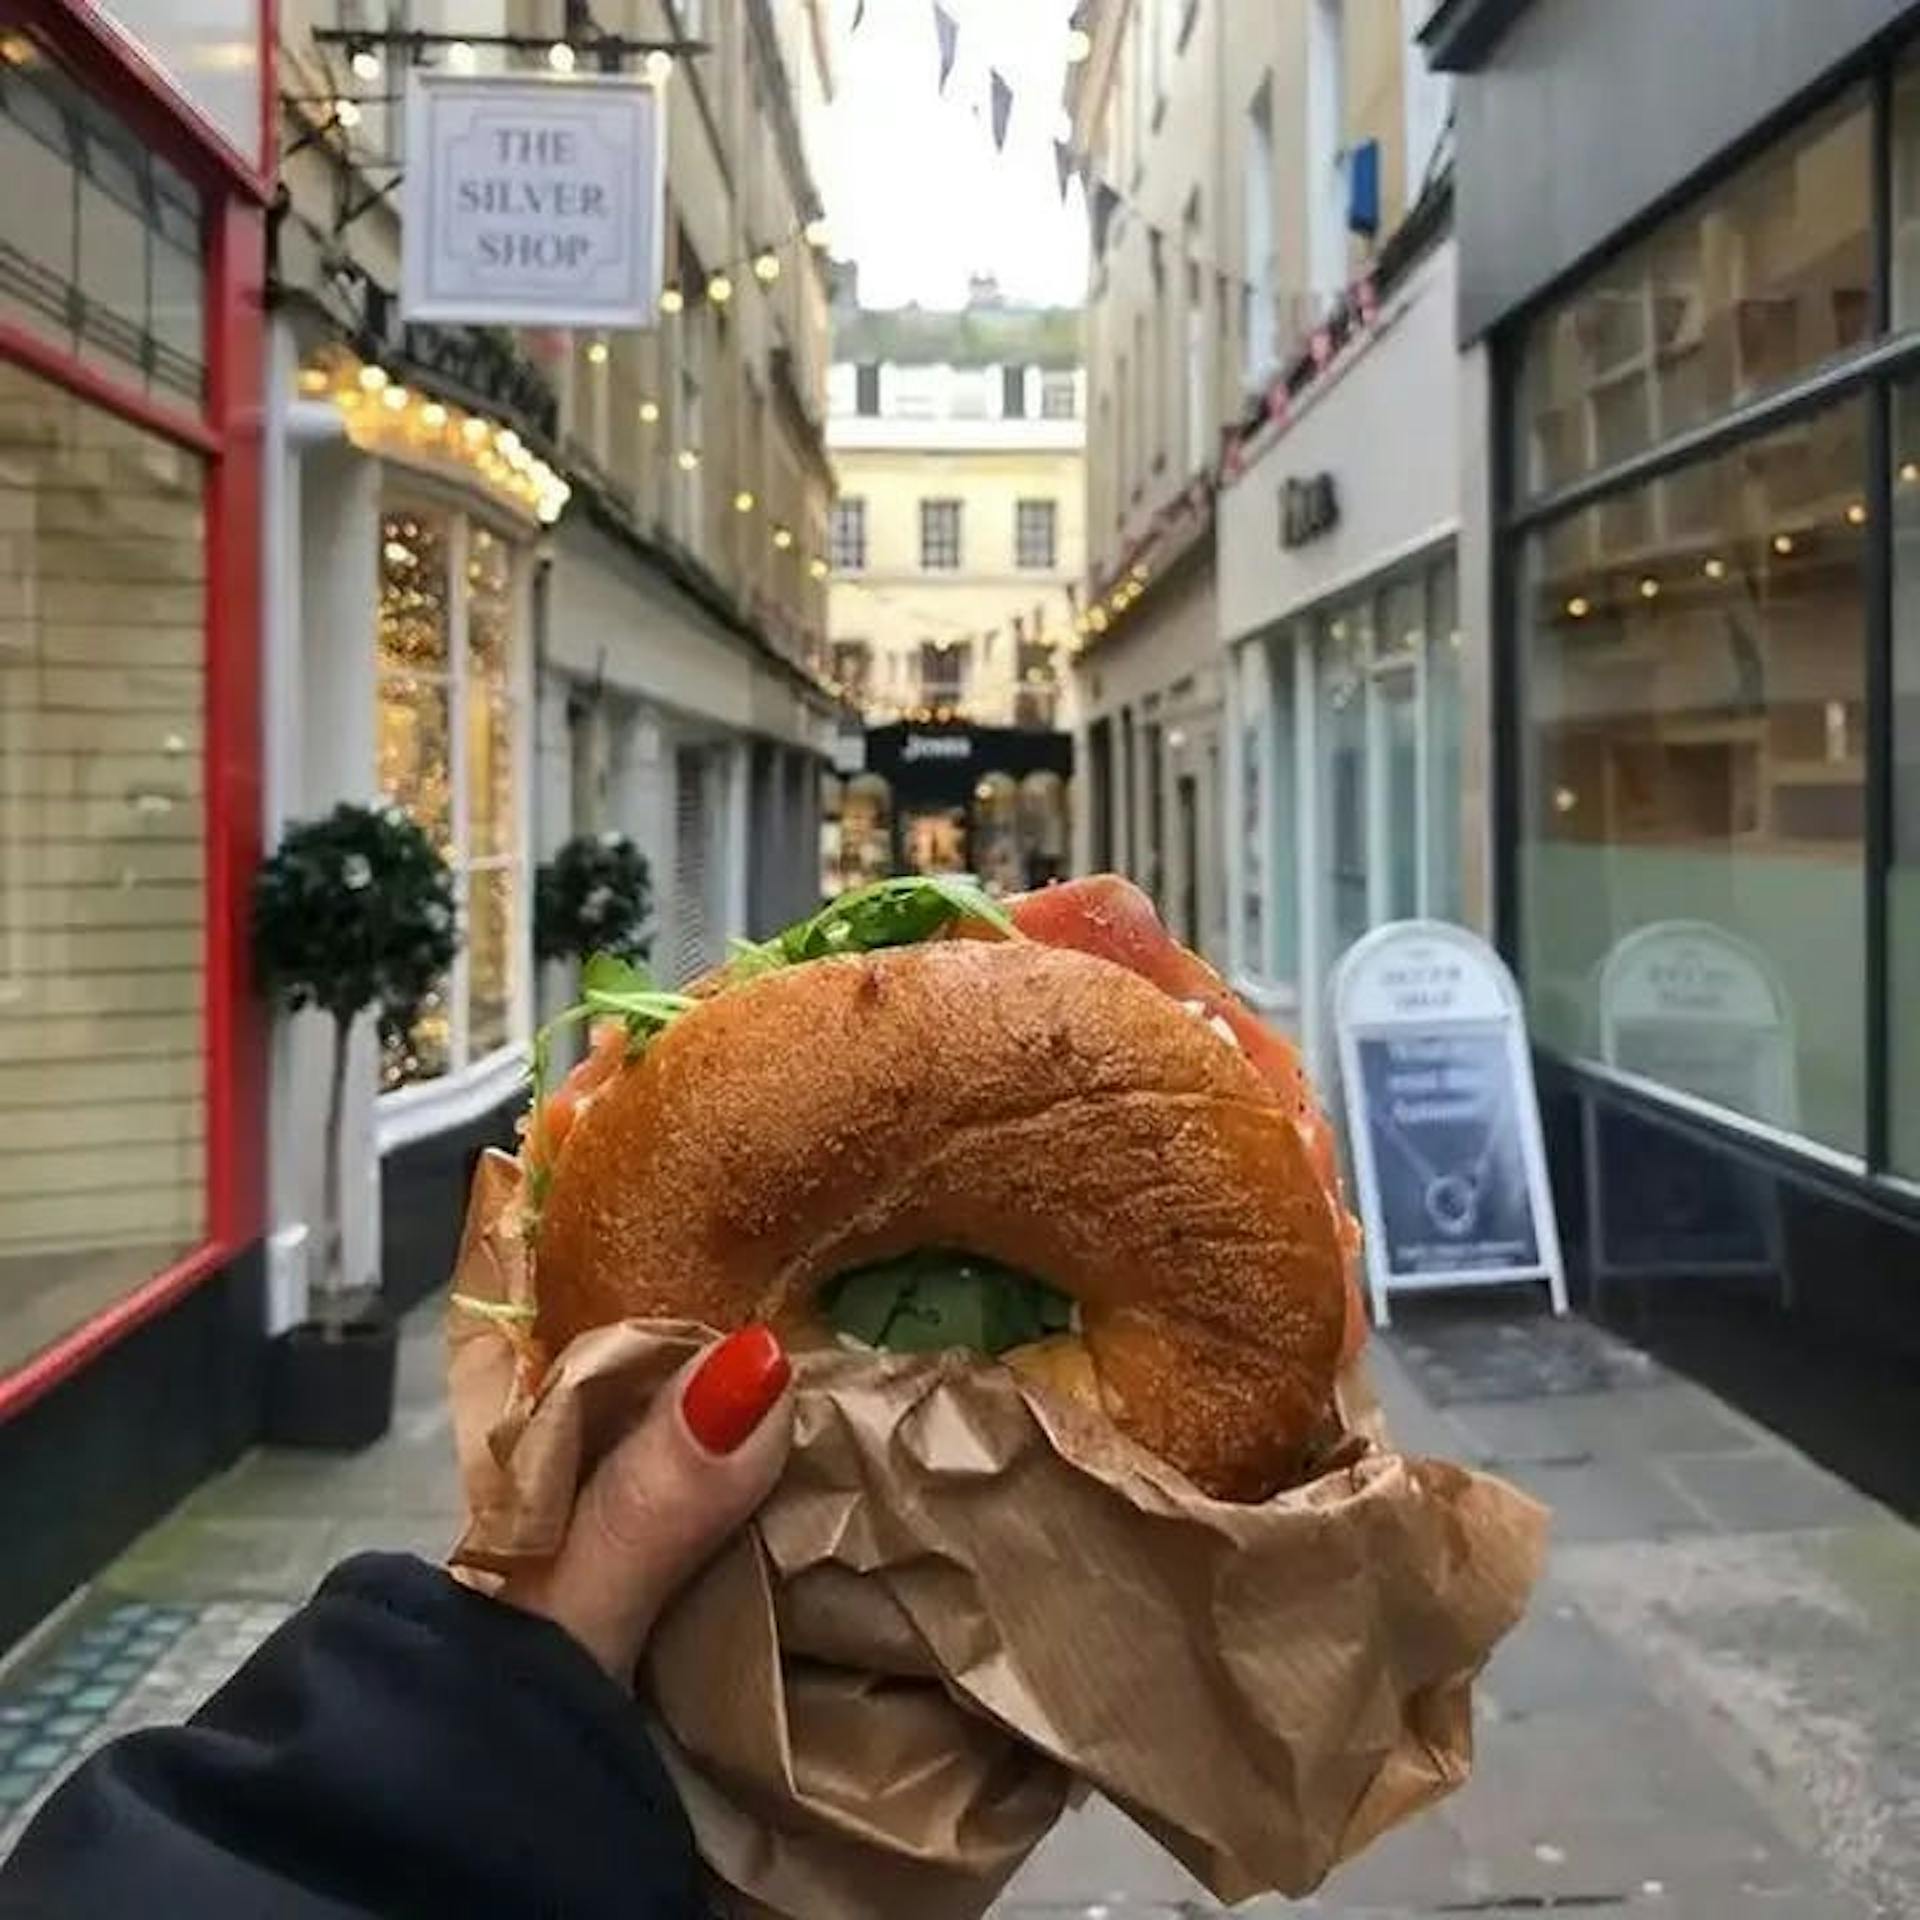 Holding up a bagel